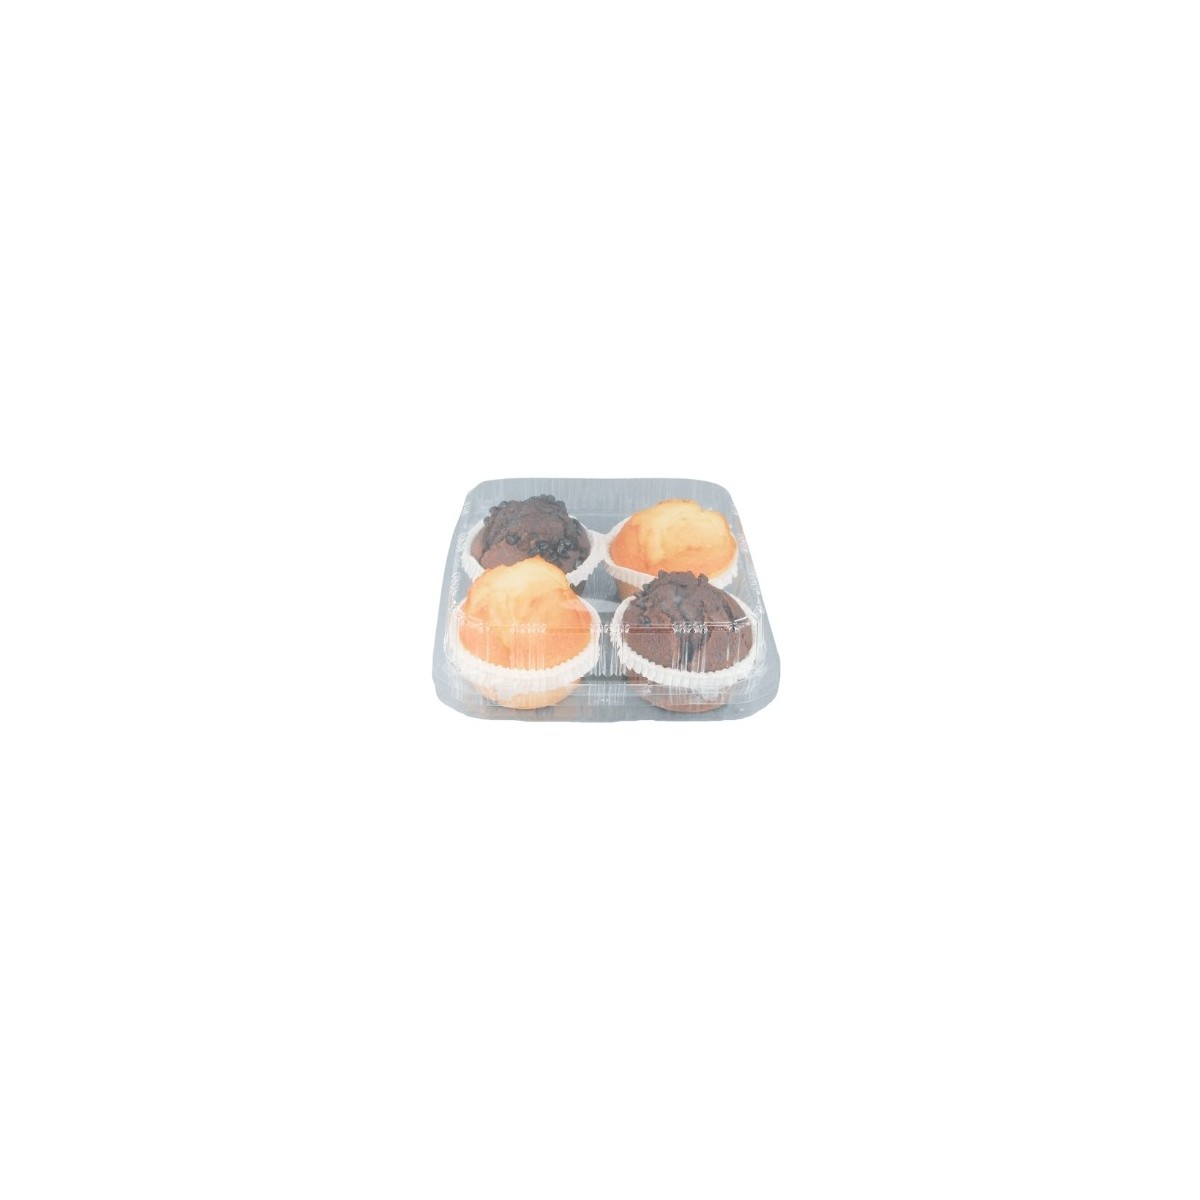 PATIPACK SQUARE PASTRY BOX 16,5X16,5X6,5CM VENTILATED HINGED LID 320PCS 